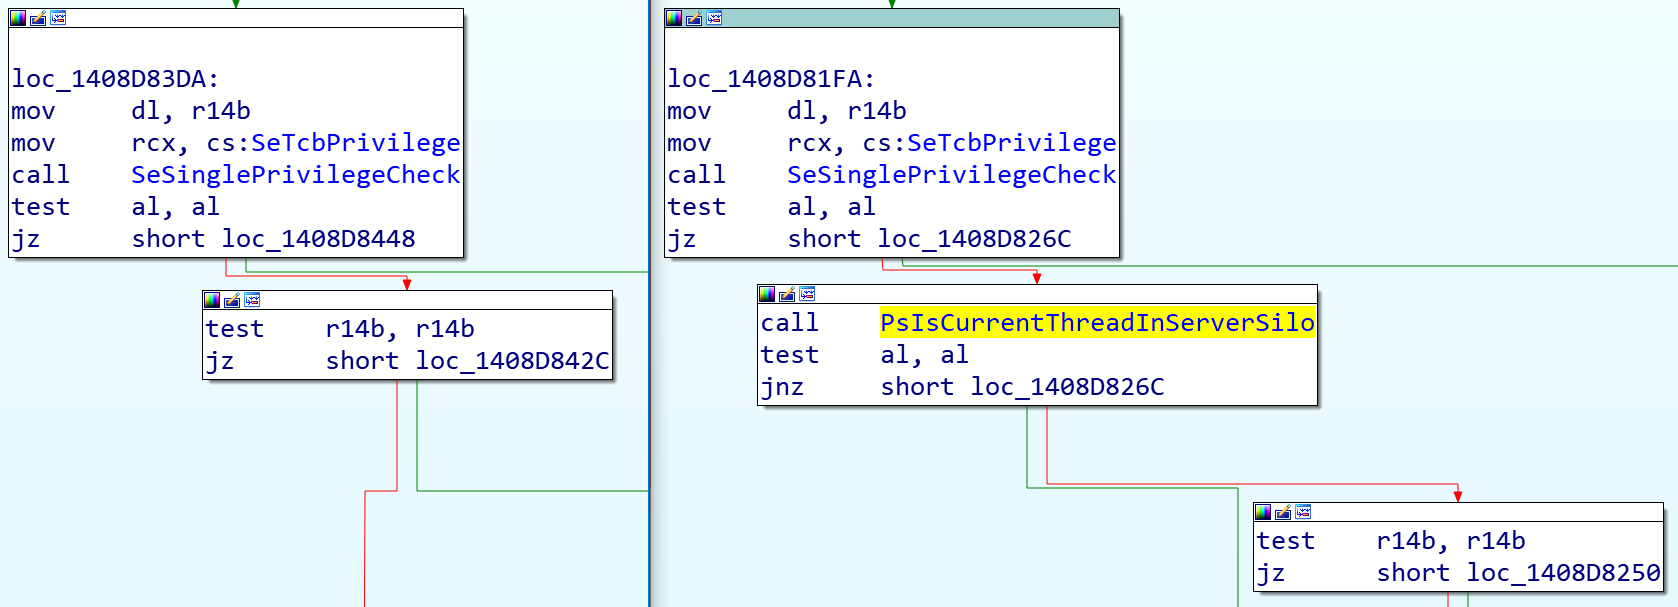 The left image shows how NtSetInformationSymbolicLink functioned before the path. The right image shows the adjustment that protects it - the PsIsCurrentThreadInServerSilo function, which checks whether the current thread is associated with a process inside a server silo. 